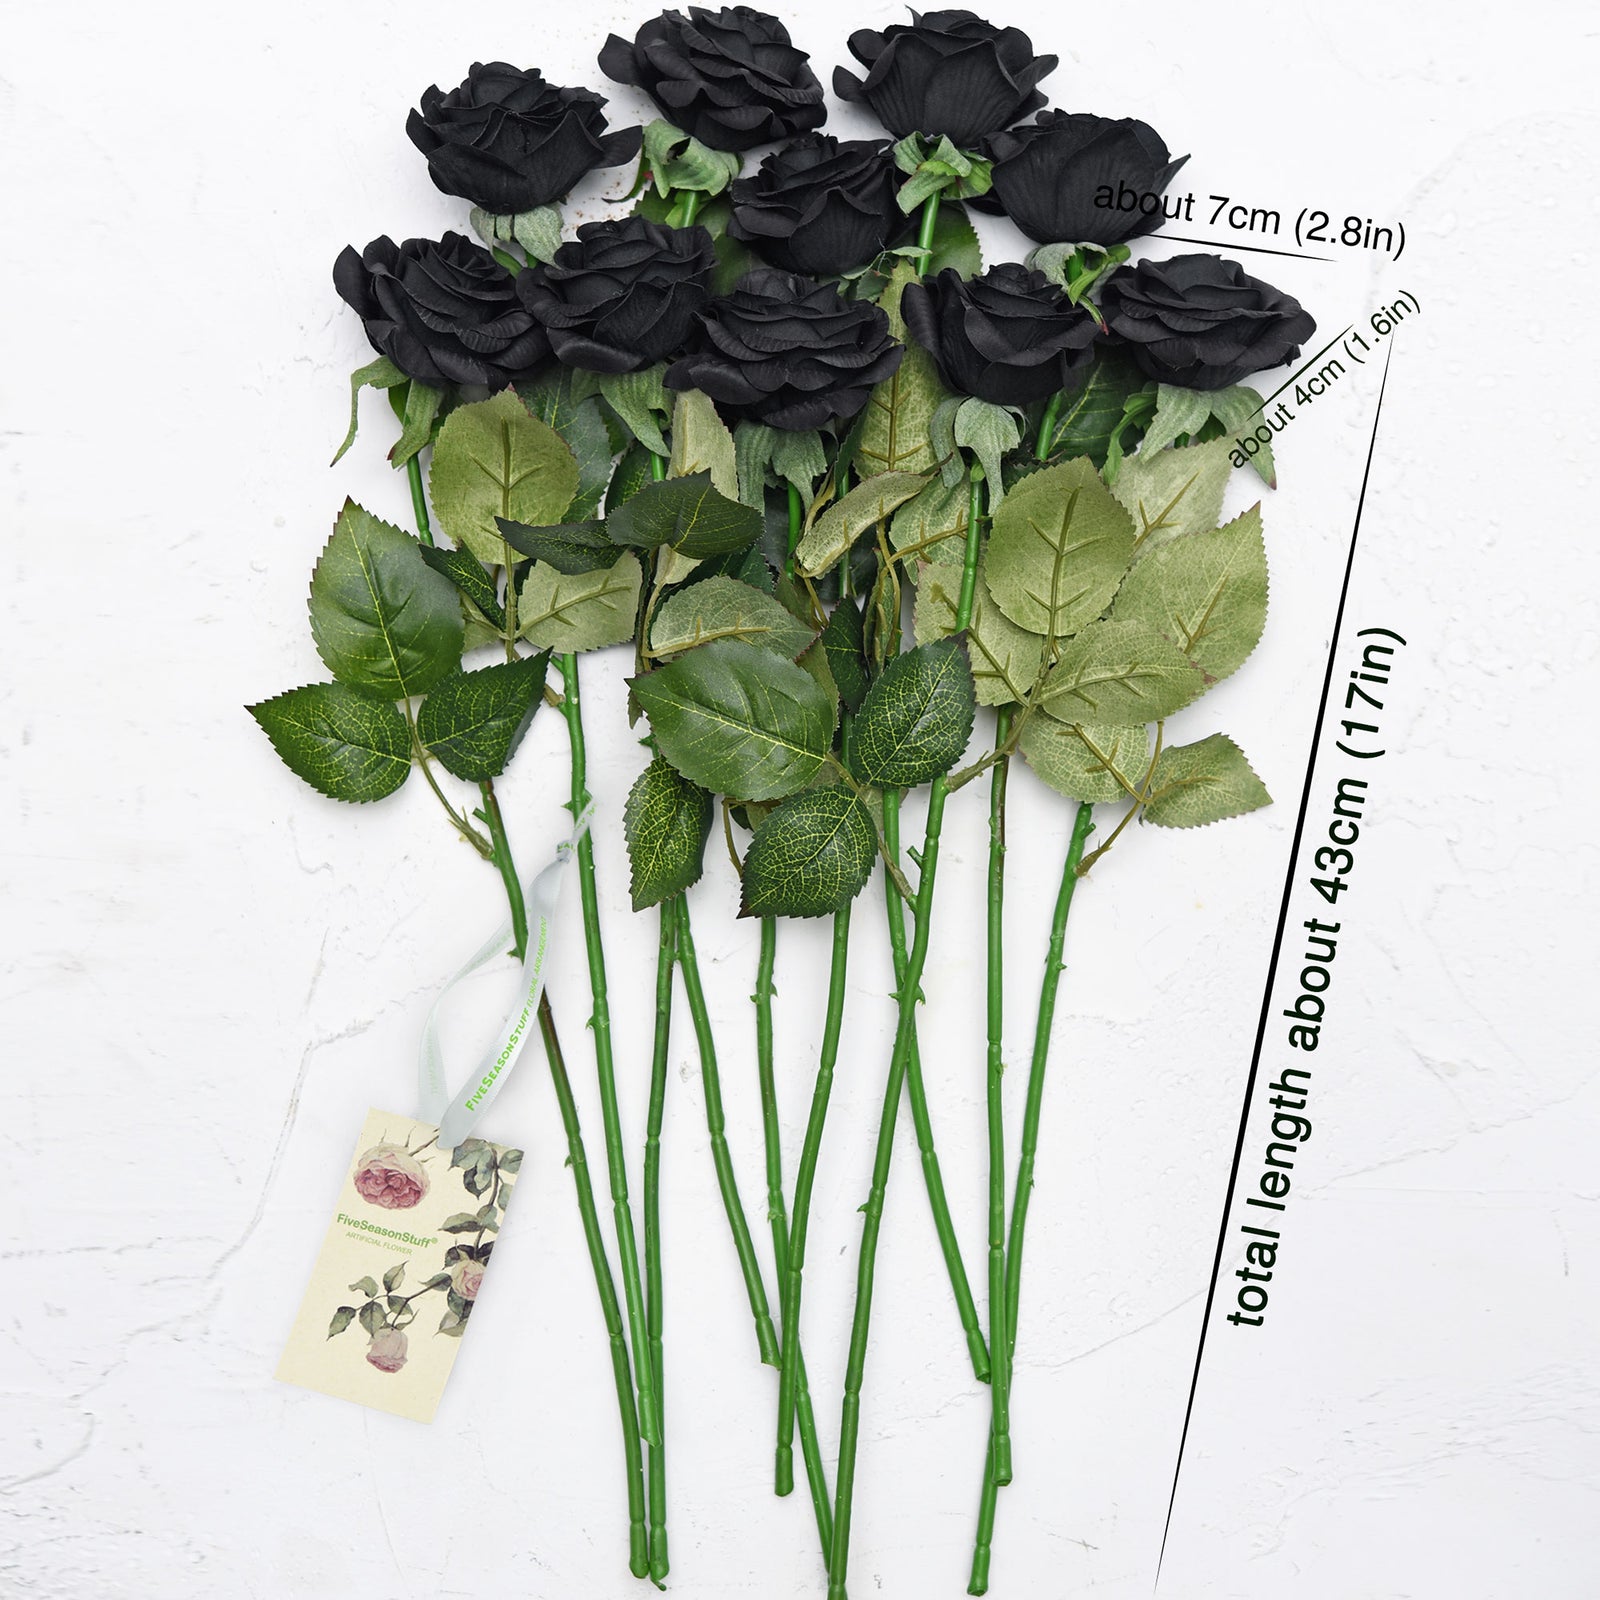 Visland 5 Pcs Black Artificial Silk Rose Petals Flower Decoration with Stems for Product Photography DIY Wedding Bouquets Black/Red Bridal Party